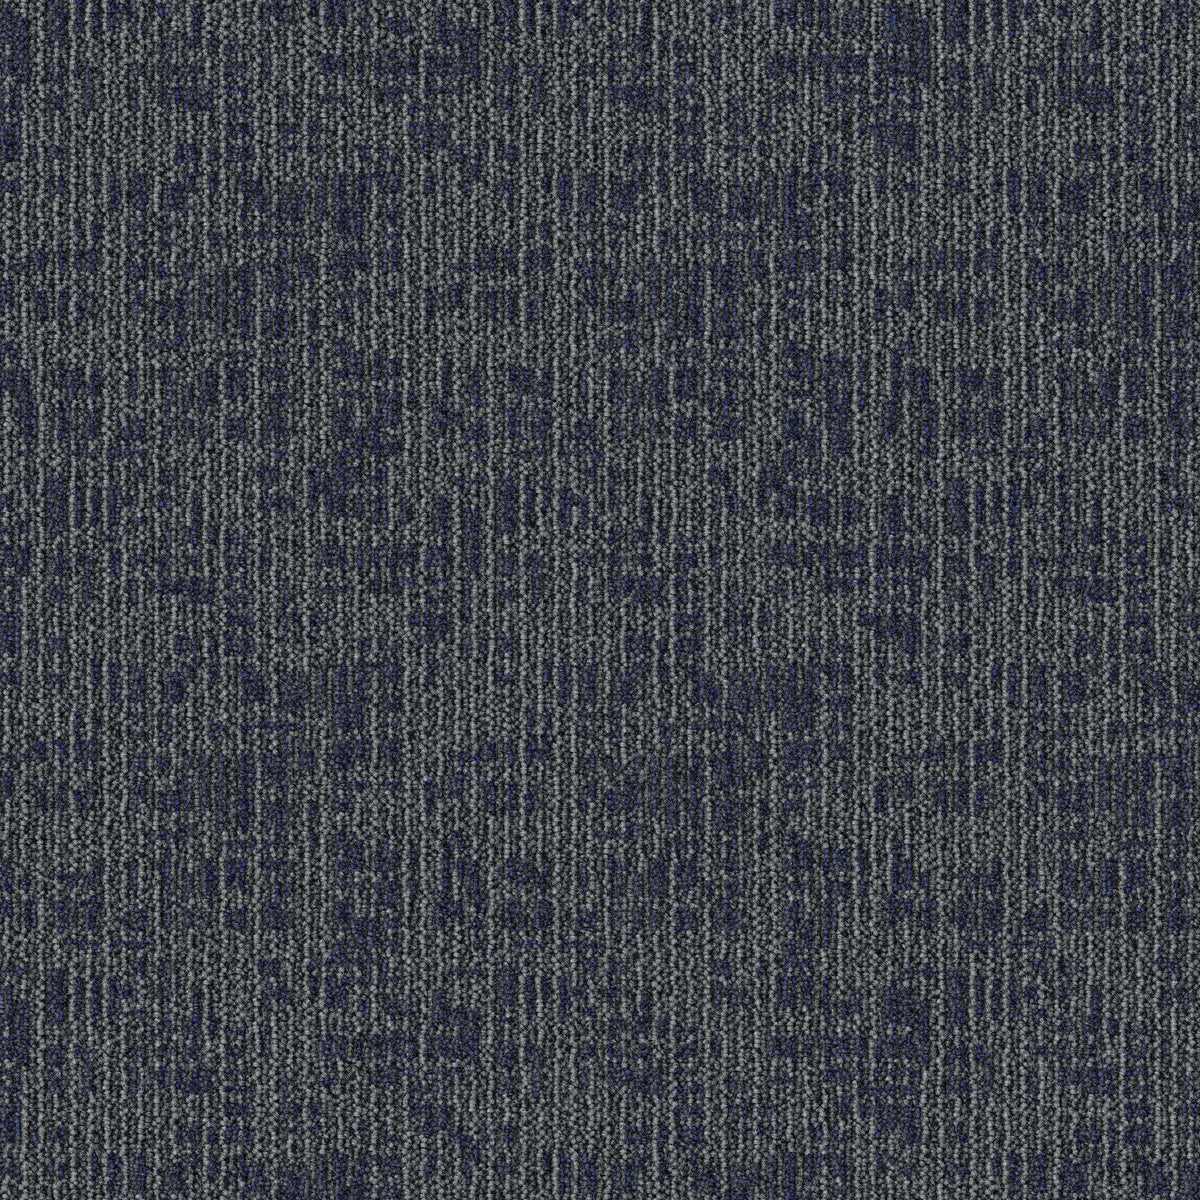 Mohawk Group - Sketch Effect - Shaded Lines - Carpet Tile - Navy Gray